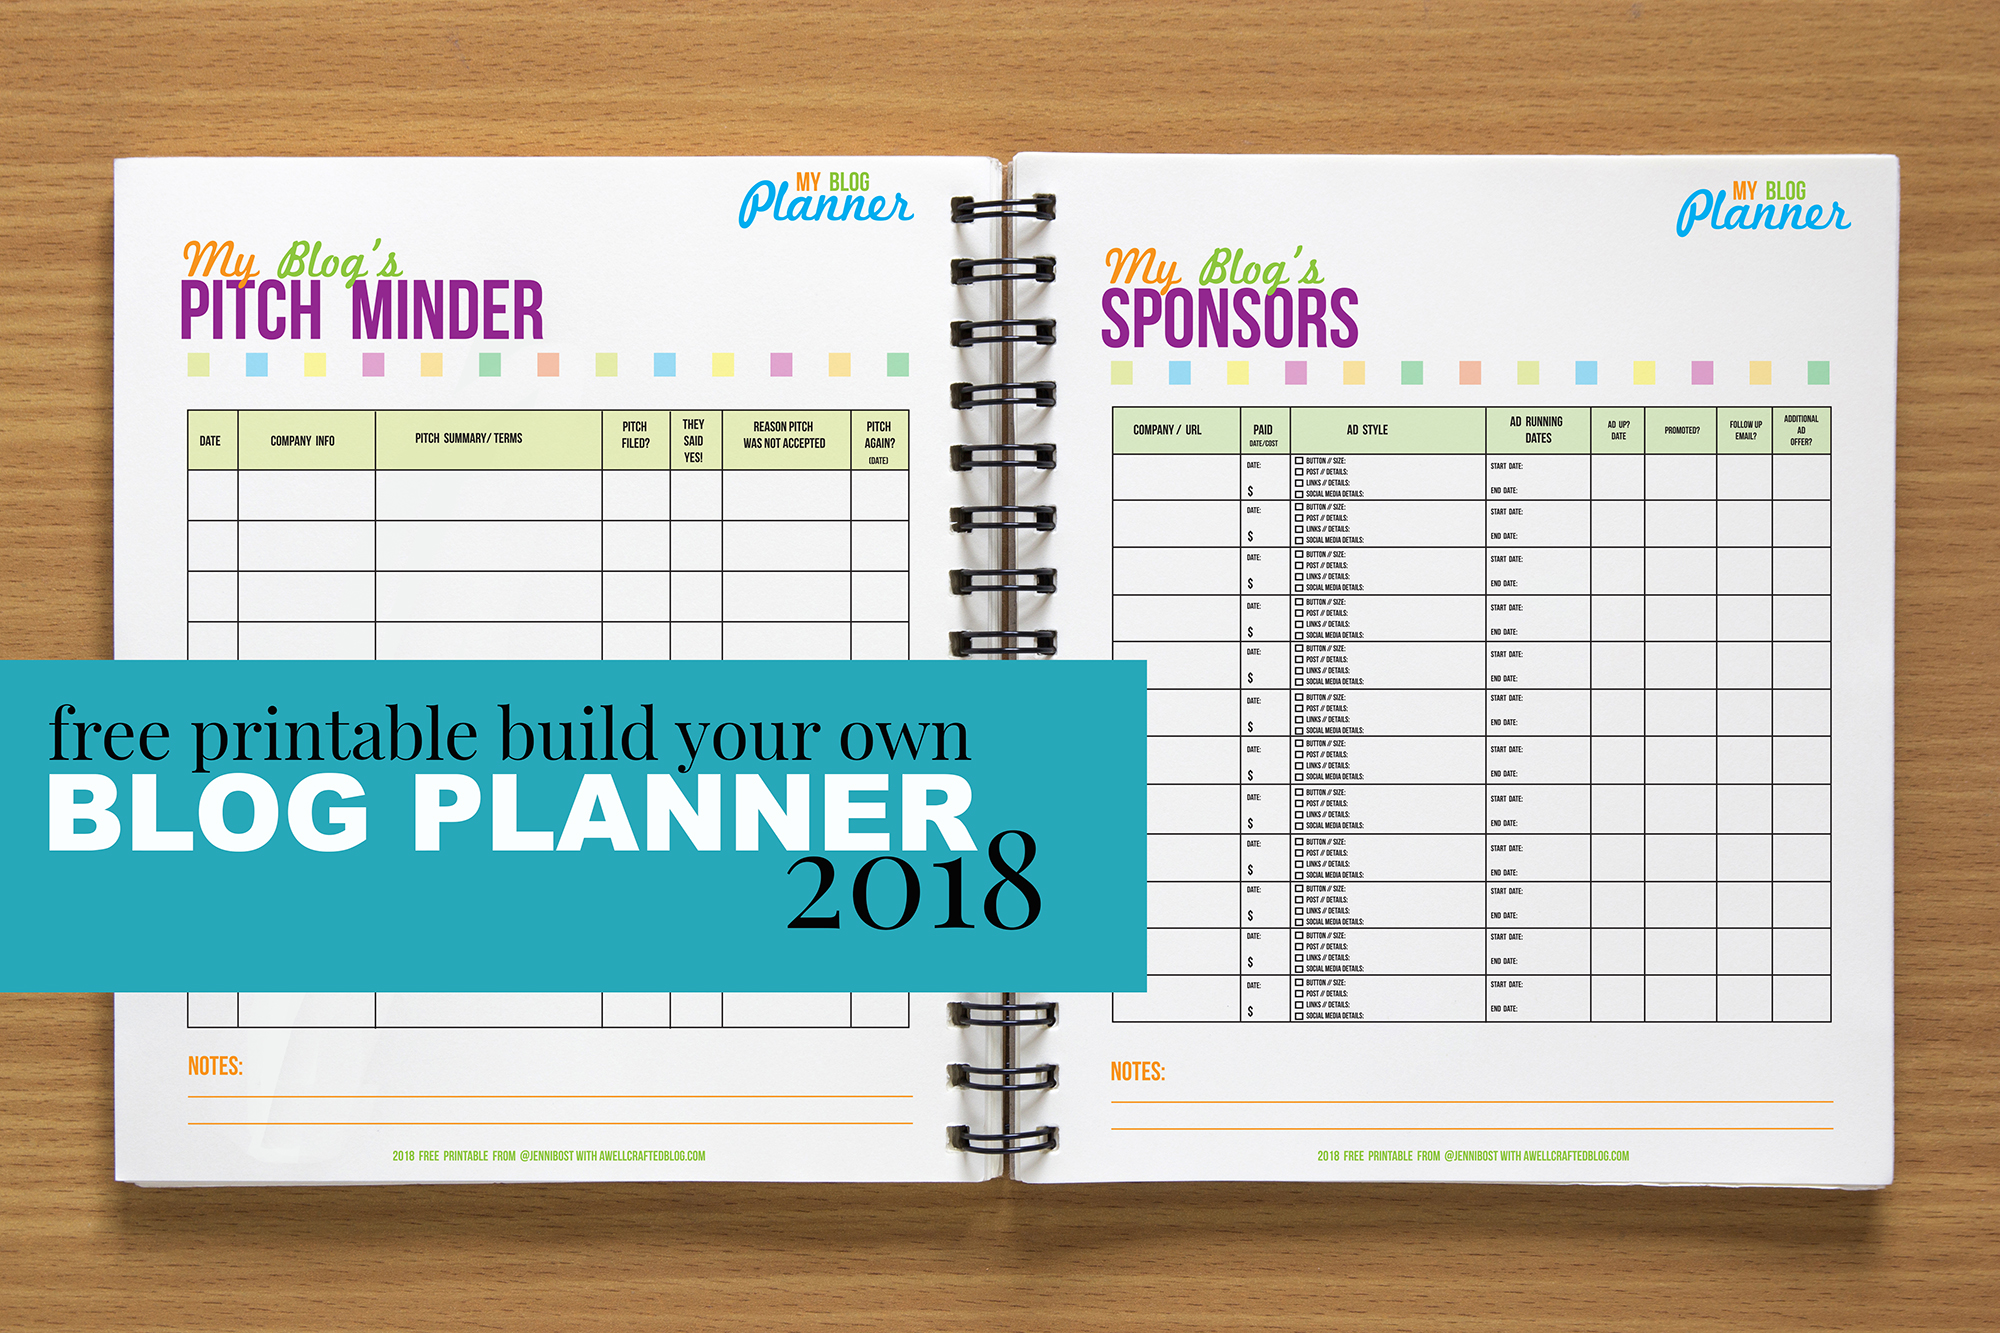 Free Printable Blog Planner | A Well Crafted Blog